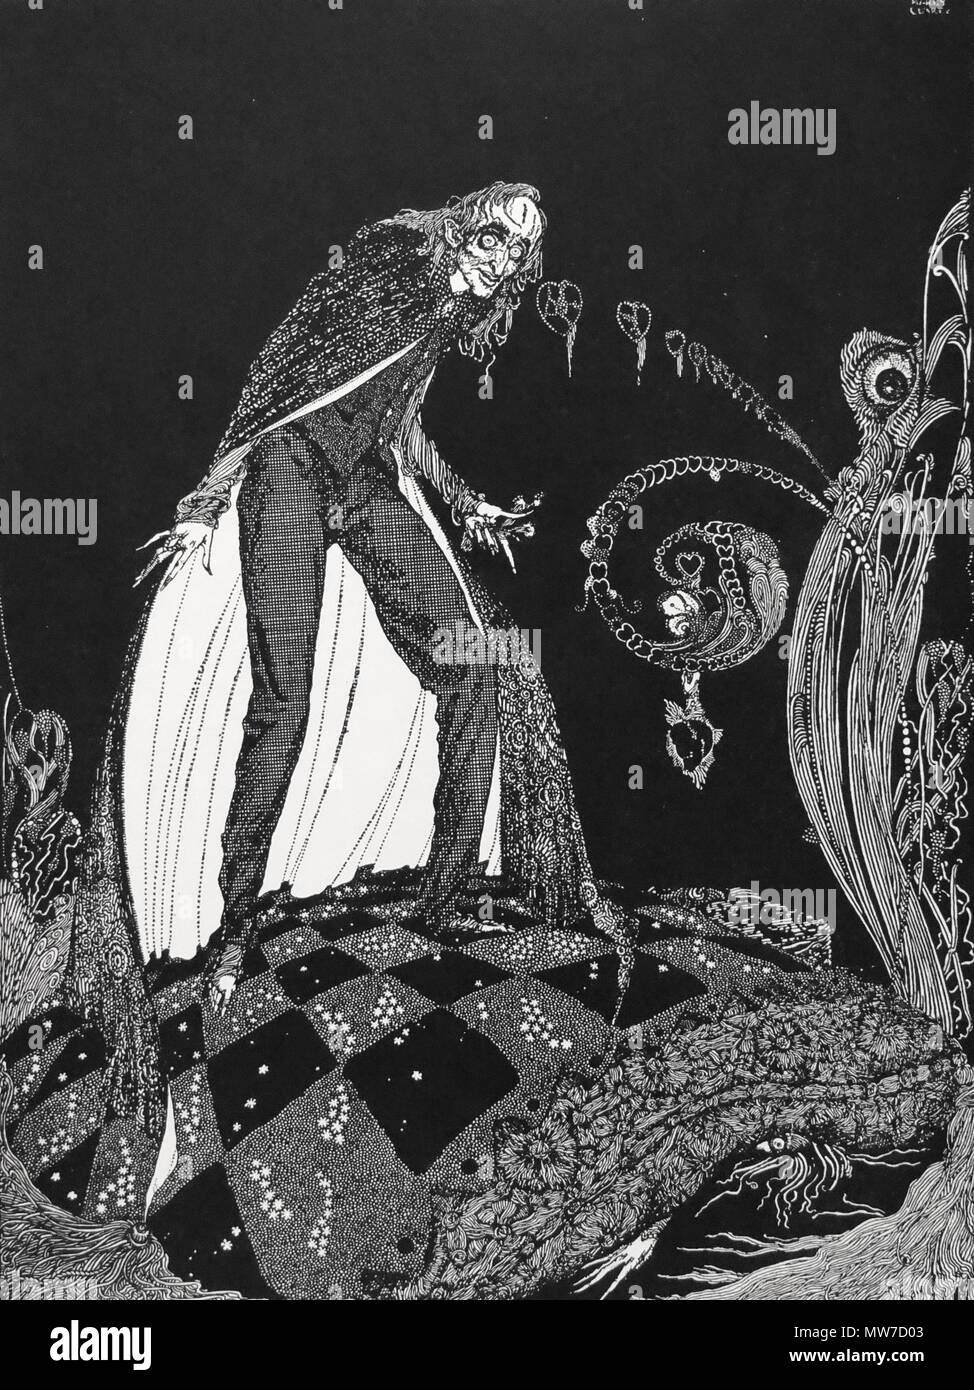 Harry Clarke - Irish illustrator - 'But, for many minutes, the heart beat on with a muffled sound.' Art by Harry Clarke for Poe's 'The Tell-Tale Heart' (1936) Stock Photo